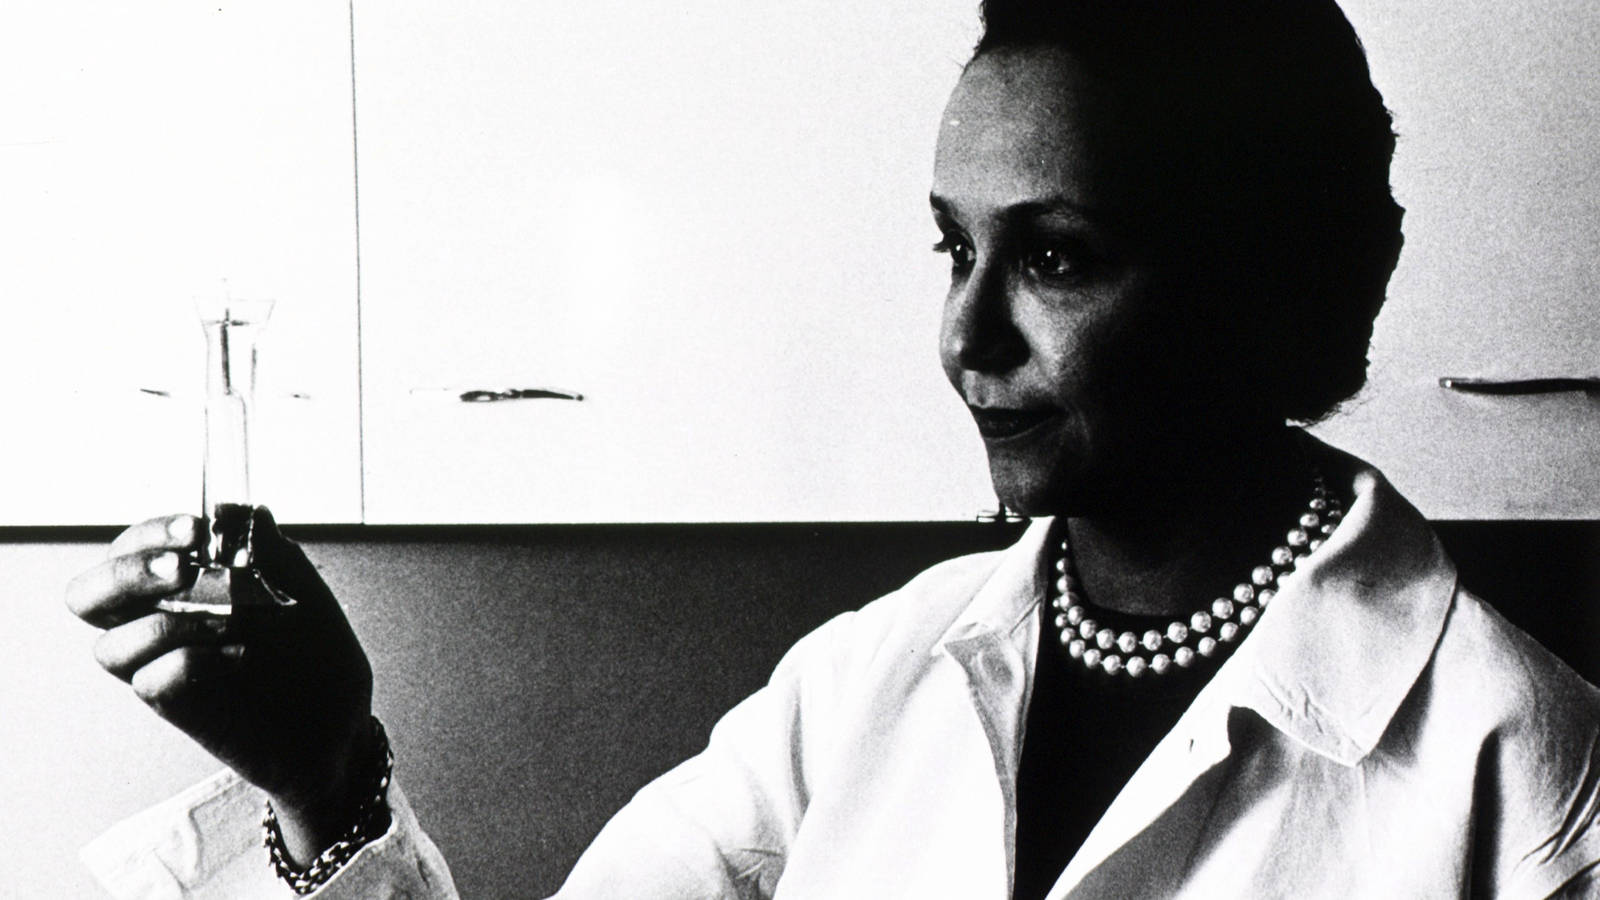 Women in Science: Jane C. Wright revolutionized cancer research (1919-2013)